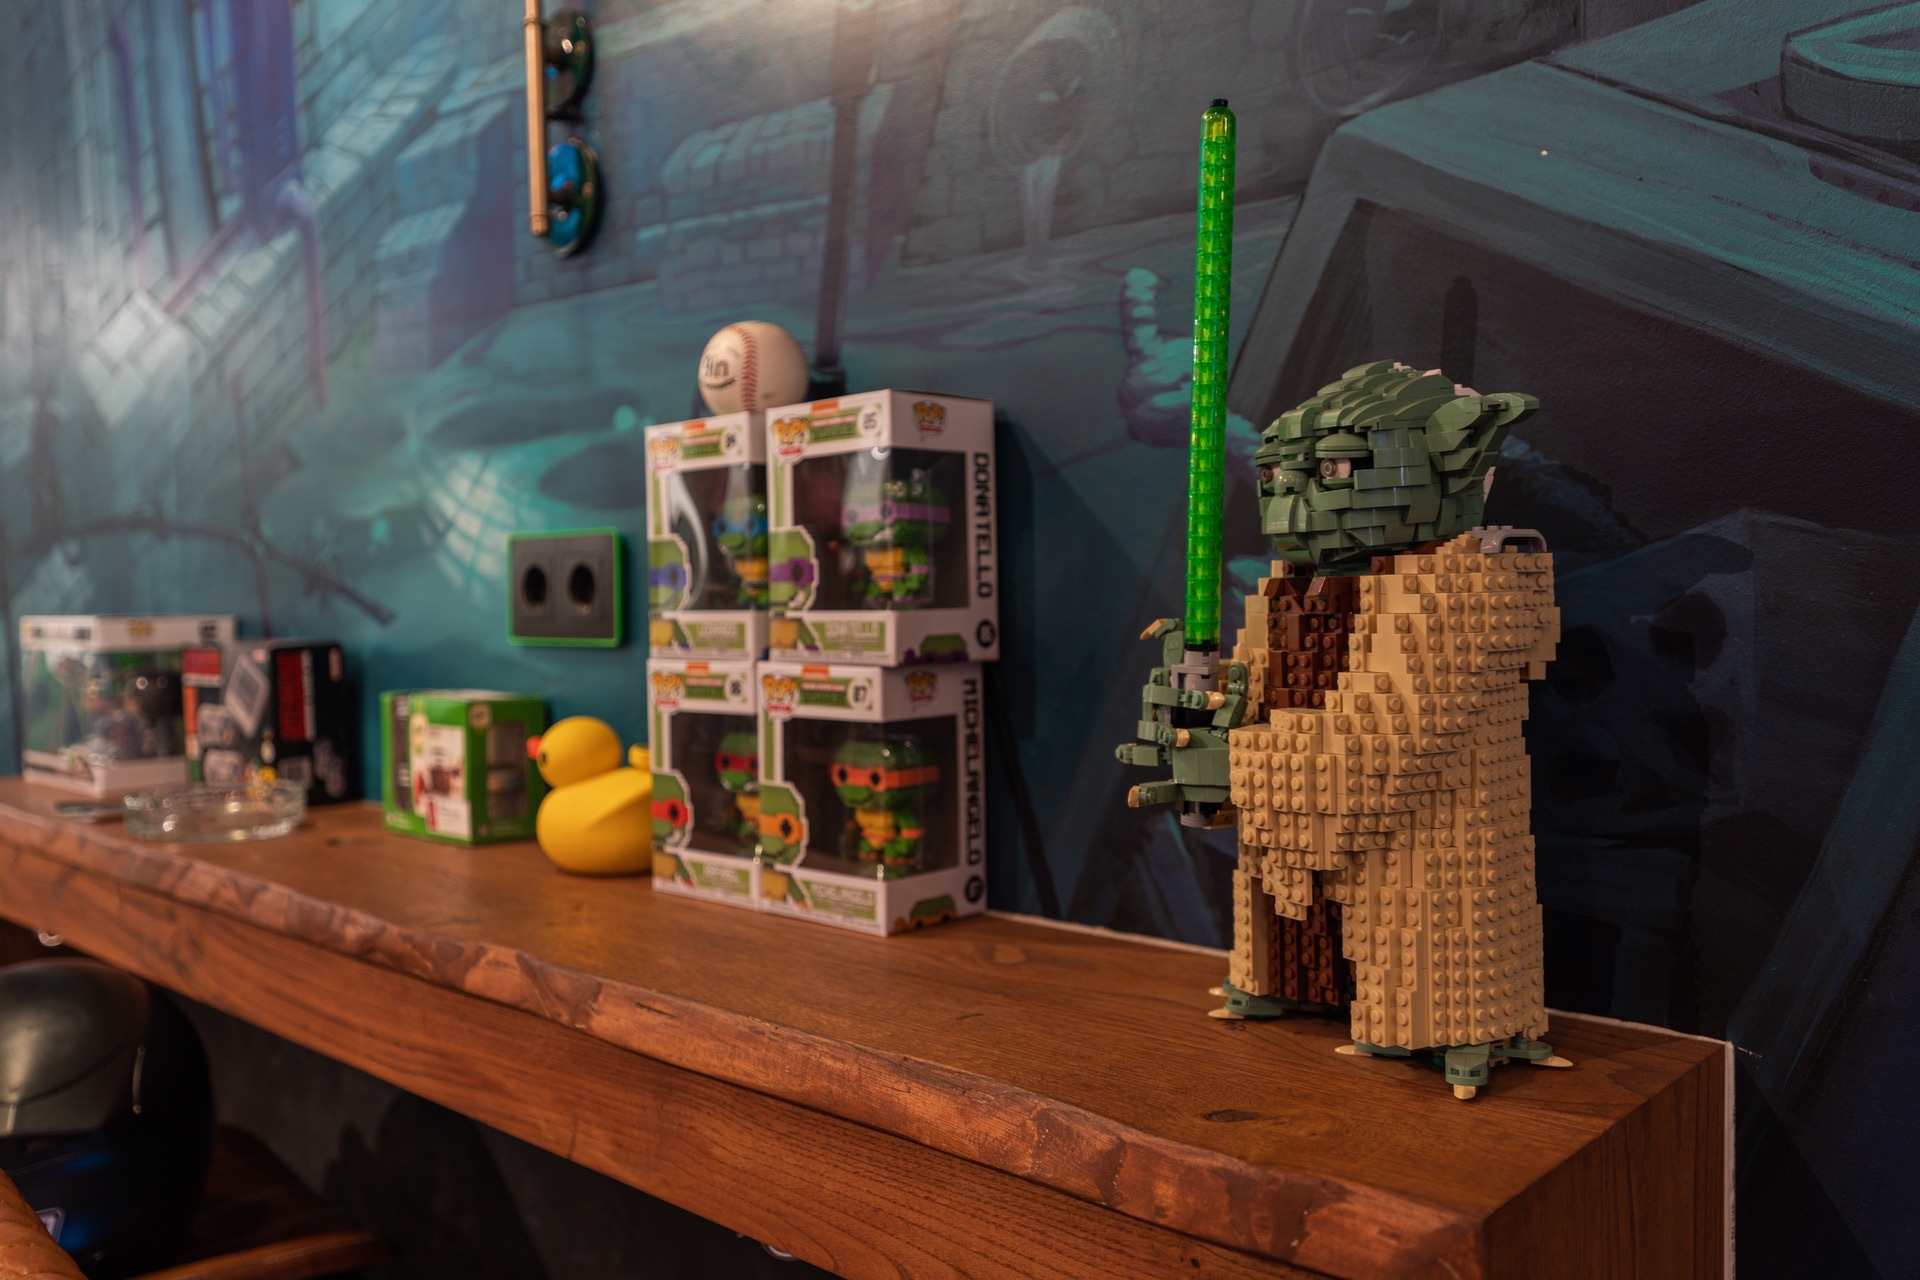 Master yoda from Lego in weed club 1UP